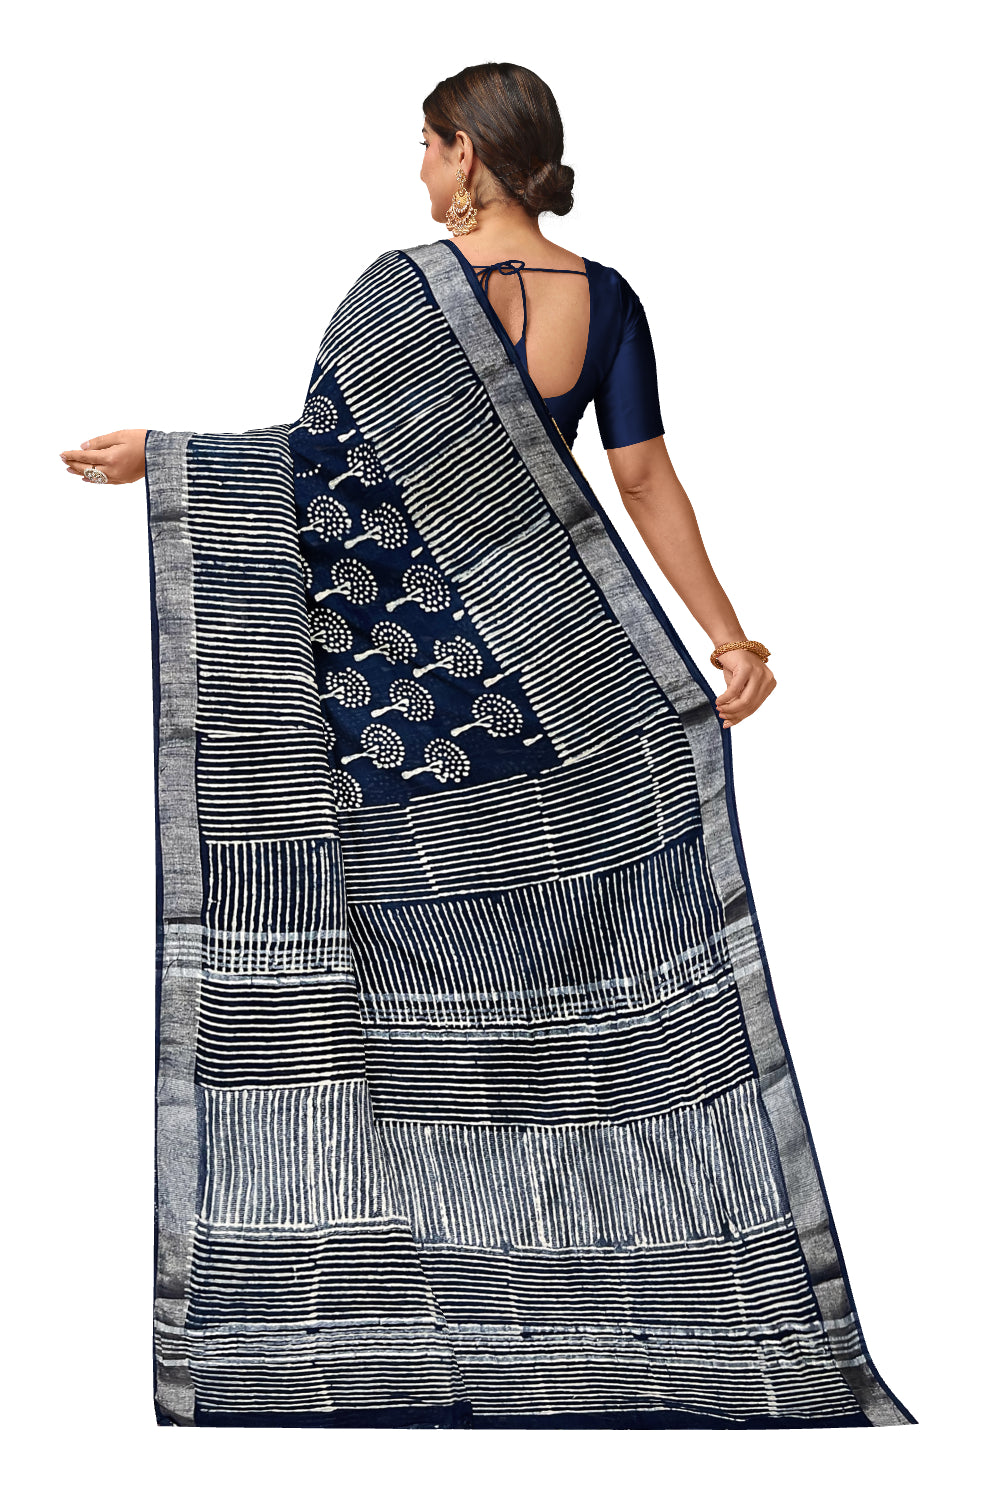 Southloom Linen Dark Blue Designer Saree with Floral Prints (include Separate Blouse Piece)